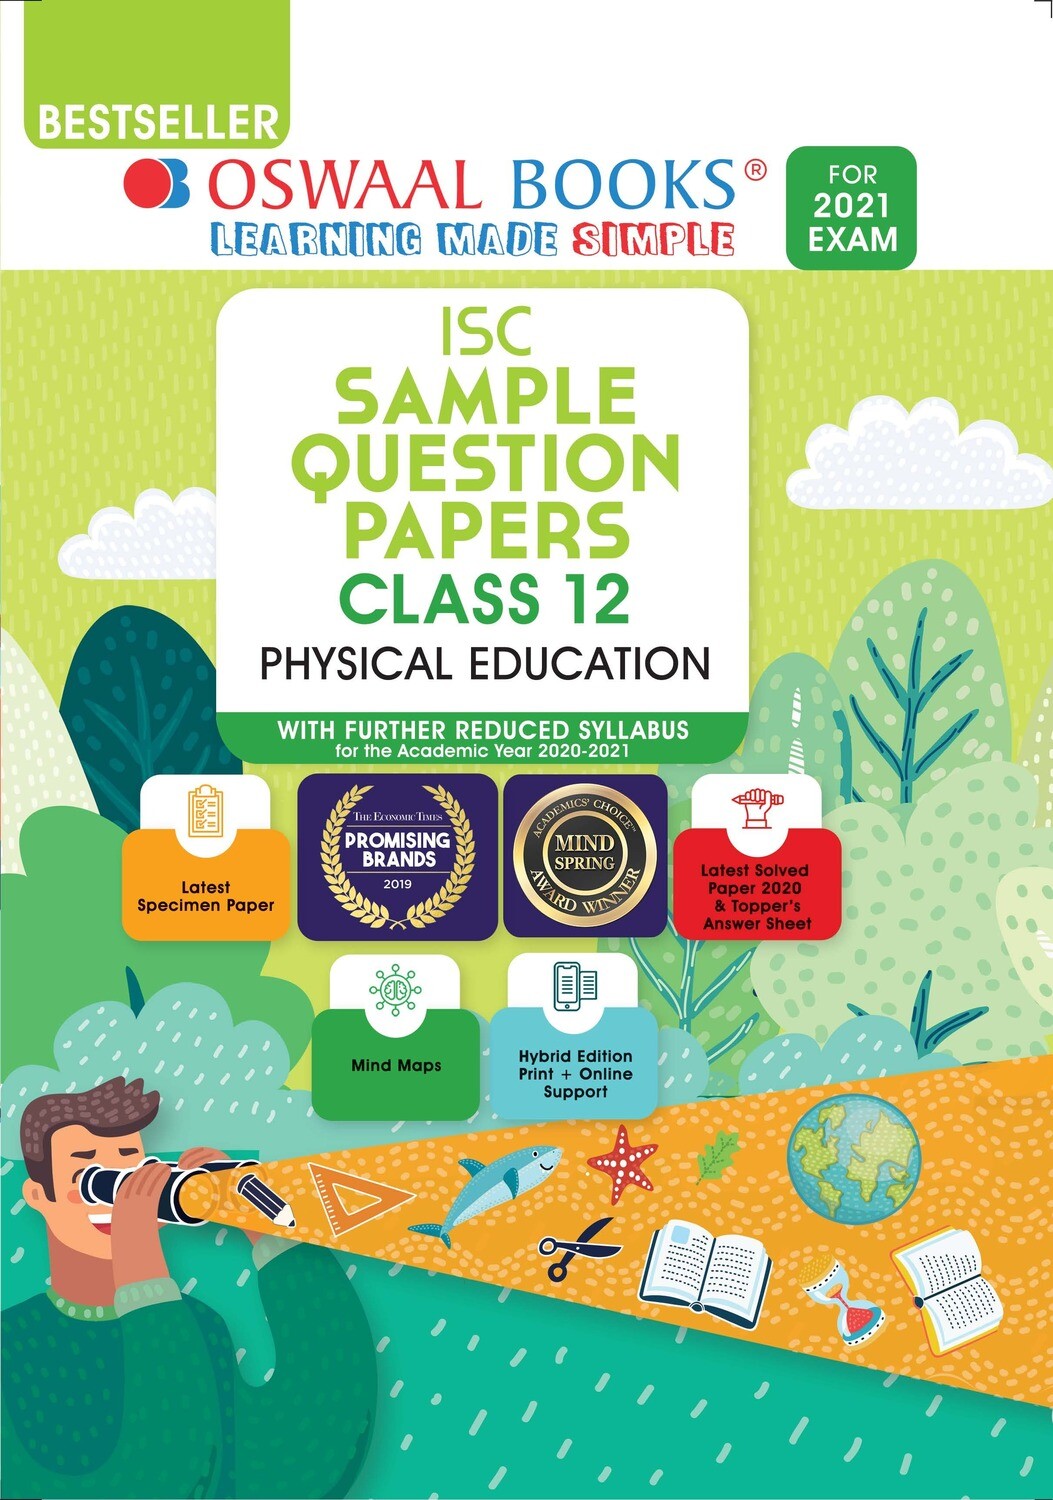 Buy e-book: Oswaal ISC Sample Question Papers Class 12 Physical Education (For 2021 Exam)